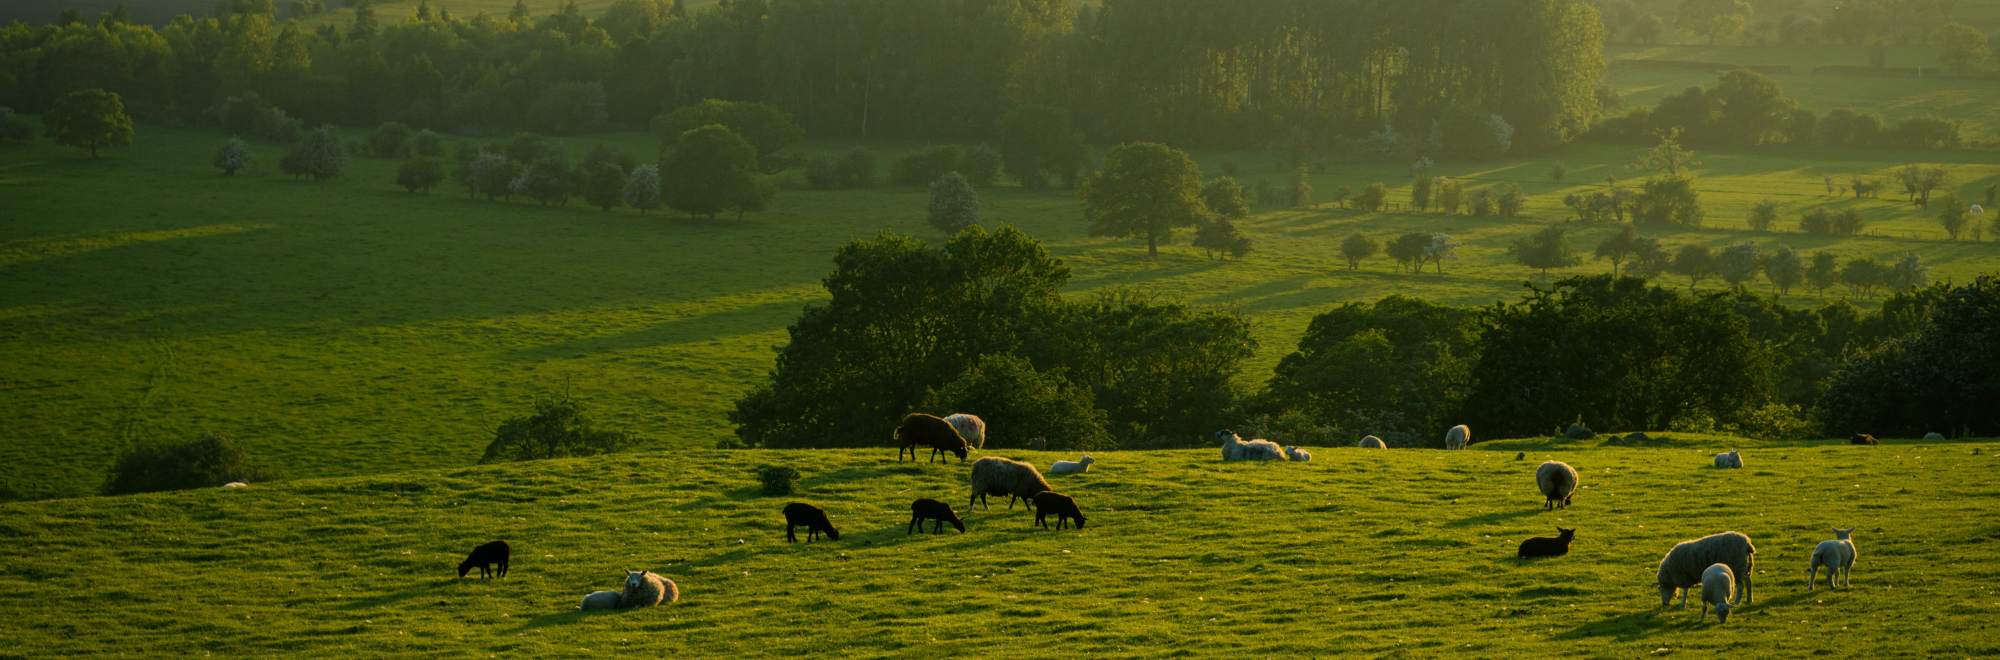 sheep grazing in a pasture with trees in the background